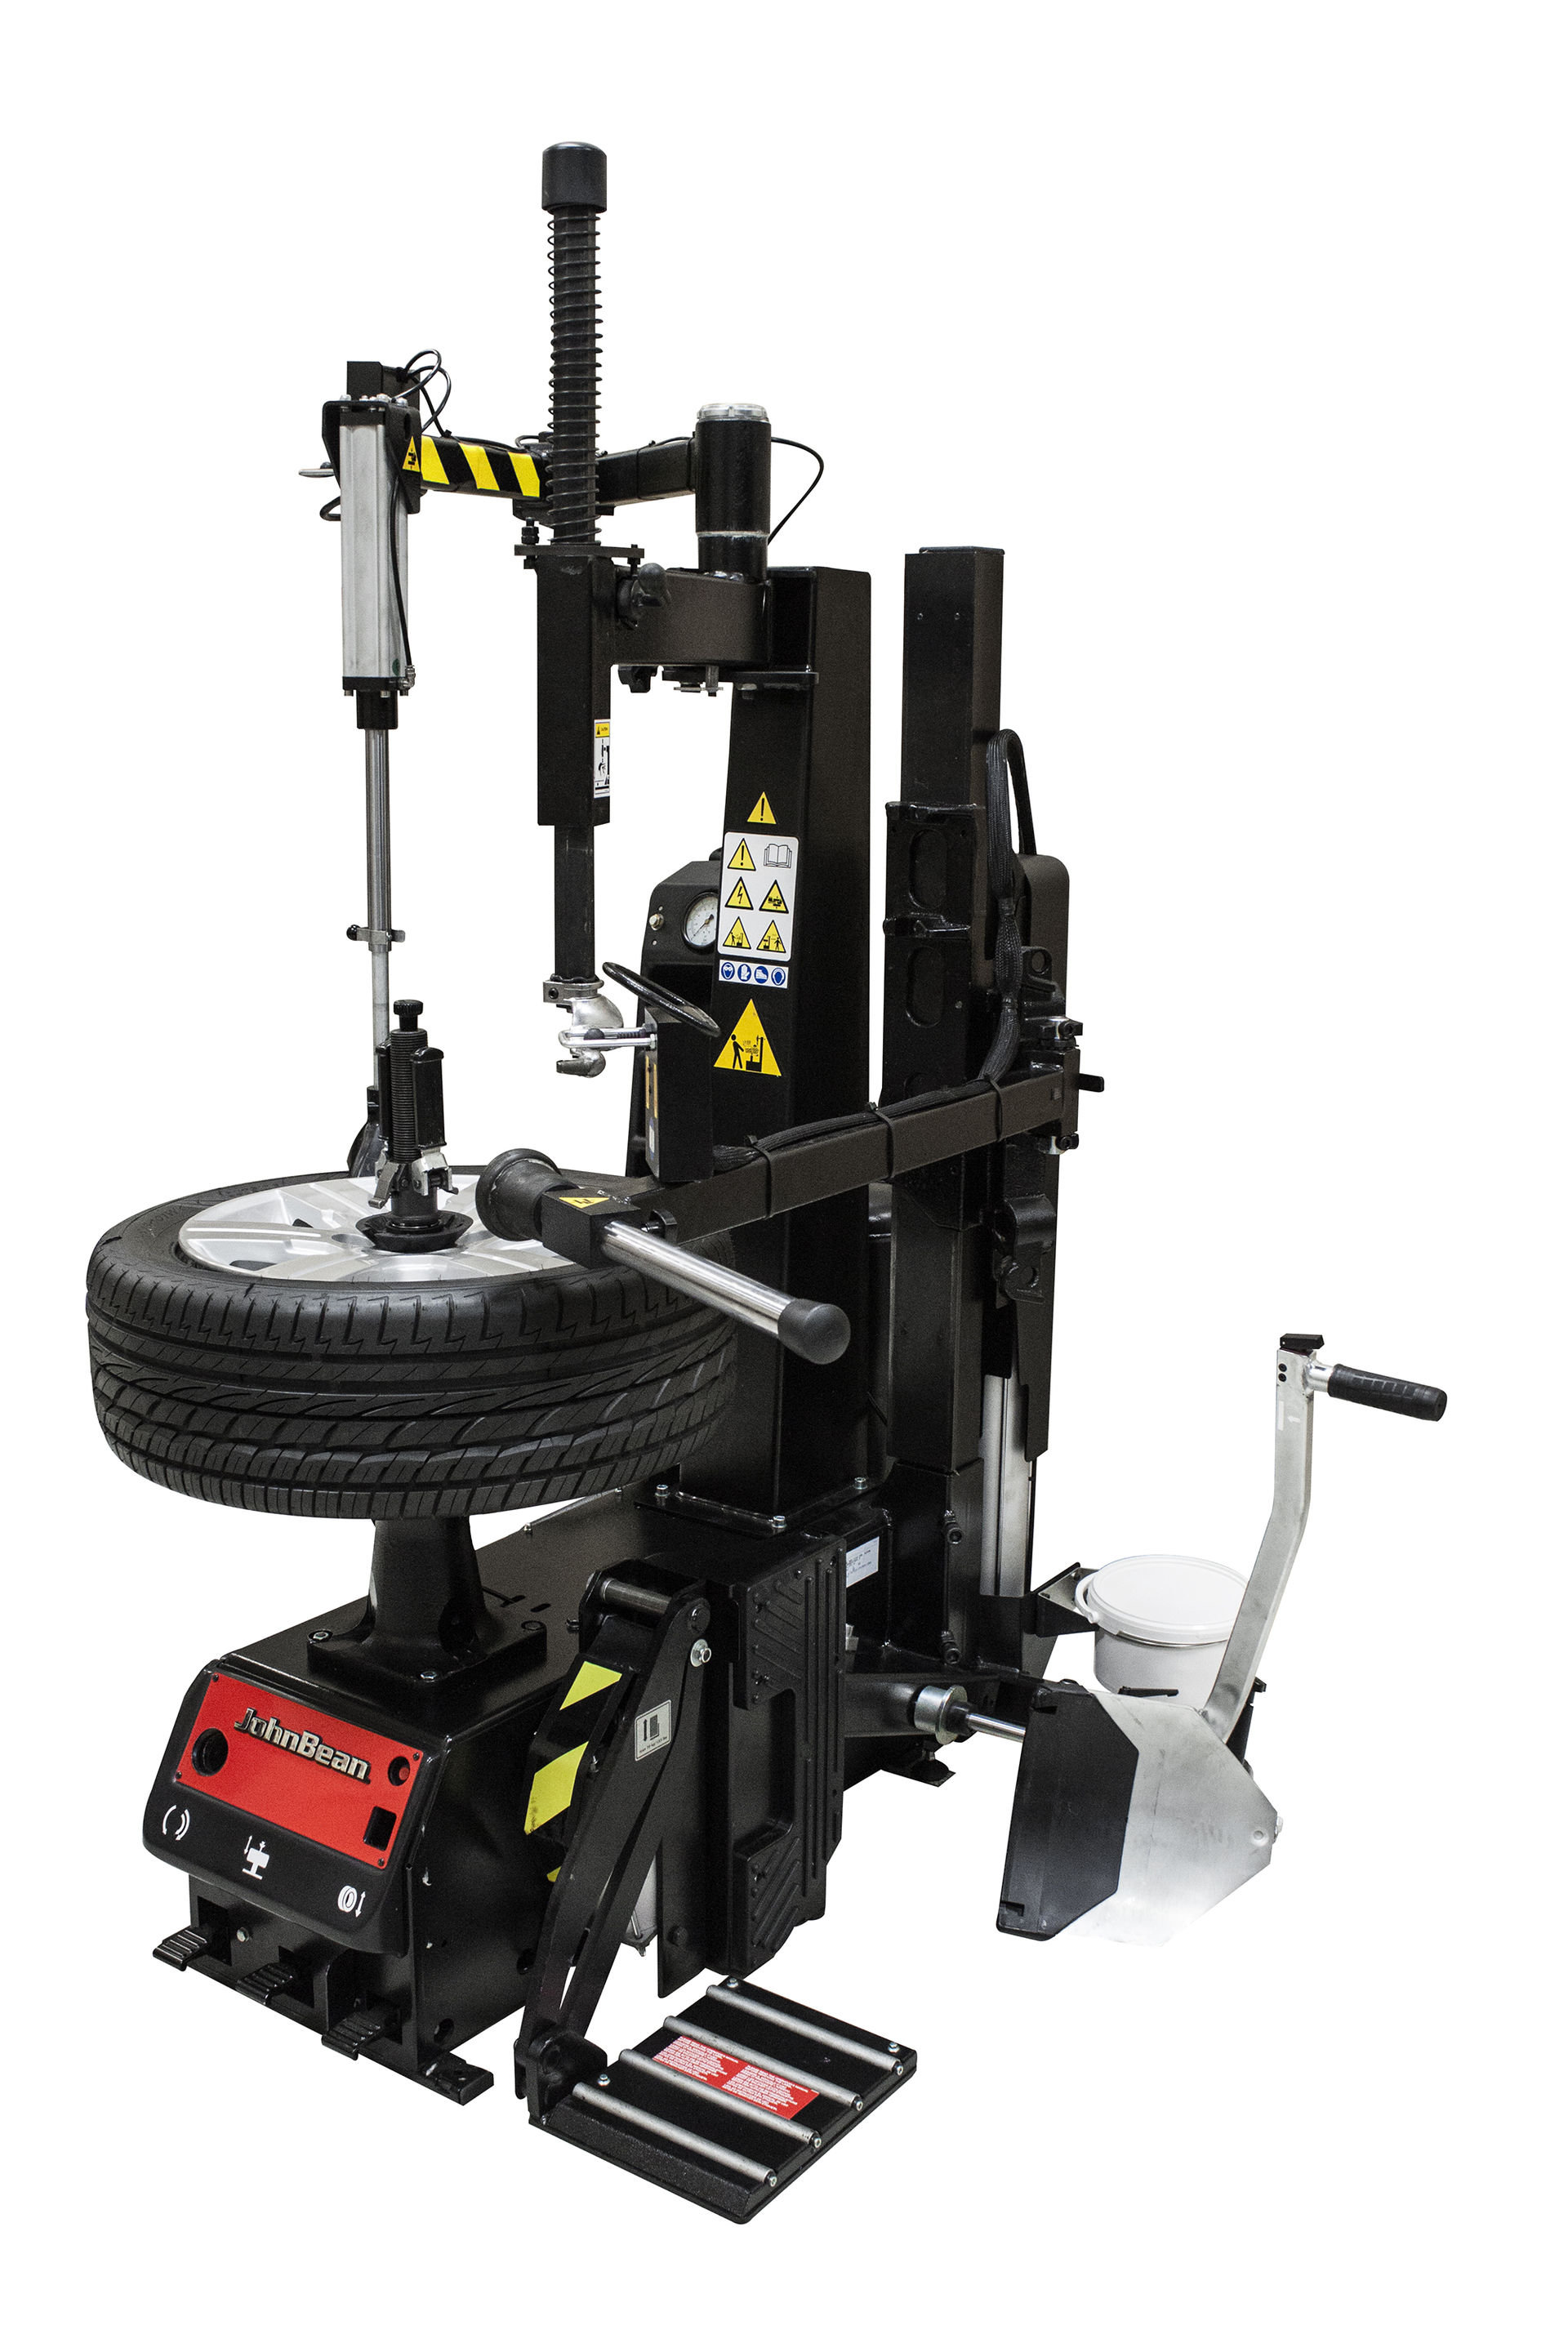 tire changing equipment